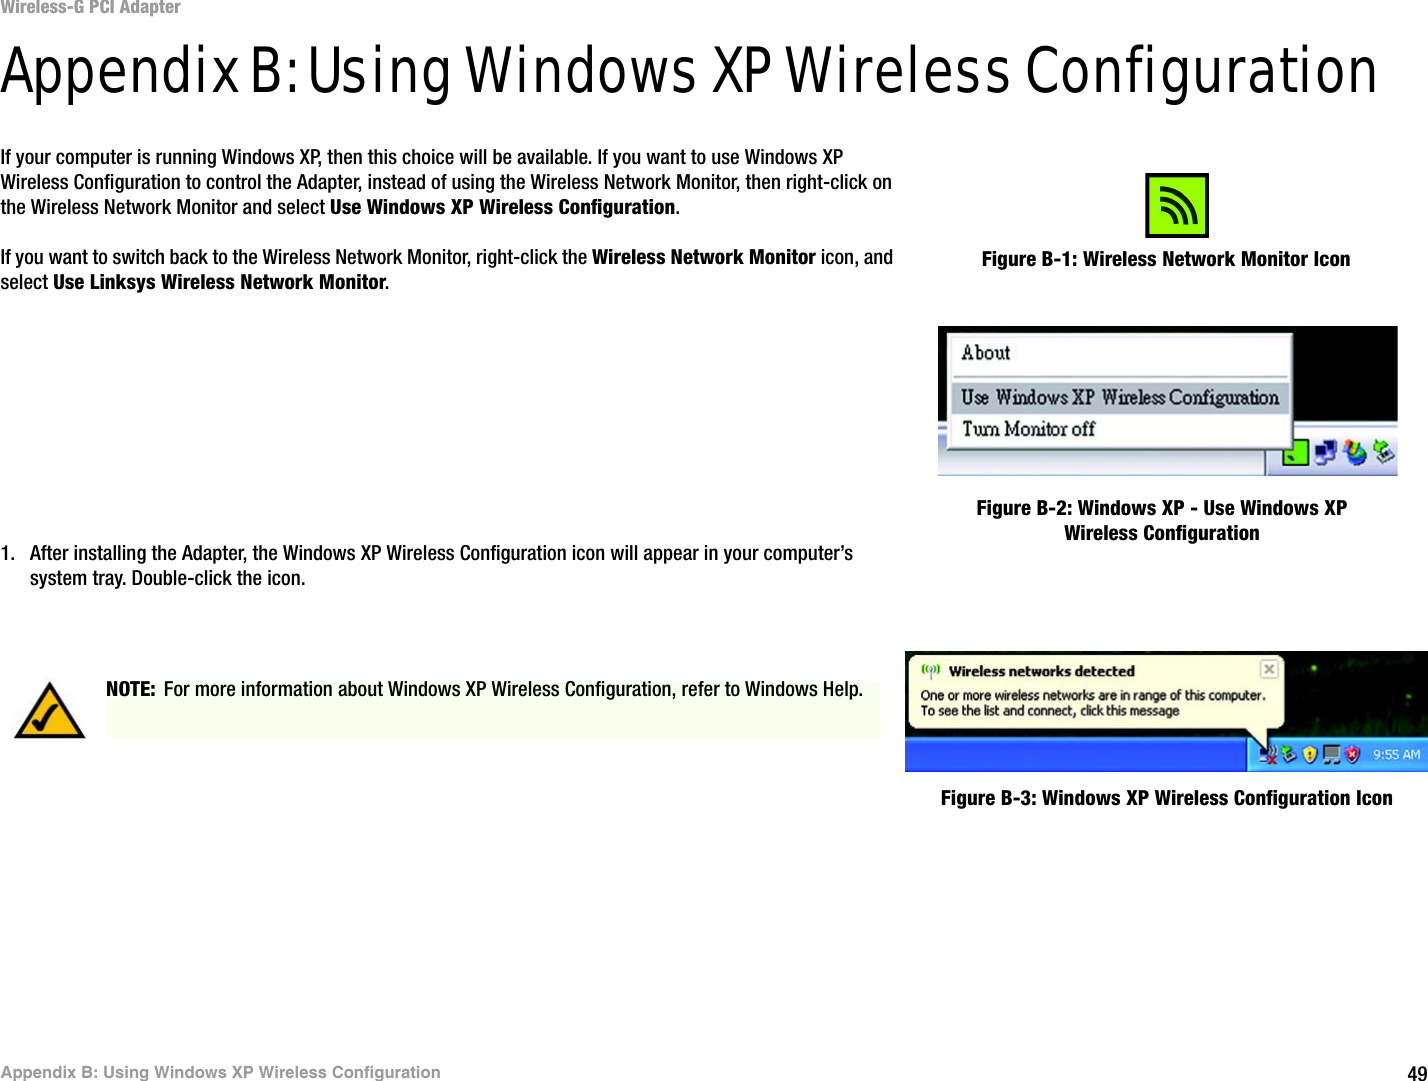 49Appendix B: Using Windows XP Wireless ConfigurationWireless-G PCI AdapterAppendix B: Using Windows XP Wireless ConfigurationIf your computer is running Windows XP, then this choice will be available. If you want to use Windows XP Wireless Configuration to control the Adapter, instead of using the Wireless Network Monitor, then right-click on the Wireless Network Monitor and select Use Windows XP Wireless Configuration. If you want to switch back to the Wireless Network Monitor, right-click the Wireless Network Monitor icon, and select Use Linksys Wireless Network Monitor.1. After installing the Adapter, the Windows XP Wireless Configuration icon will appear in your computer’s system tray. Double-click the icon. Figure B-1: Wireless Network Monitor IconFigure B-2: Windows XP - Use Windows XP Wireless ConfigurationNOTE: For more information about Windows XP Wireless Configuration, refer to Windows Help.Figure B-3: Windows XP Wireless Configuration Icon